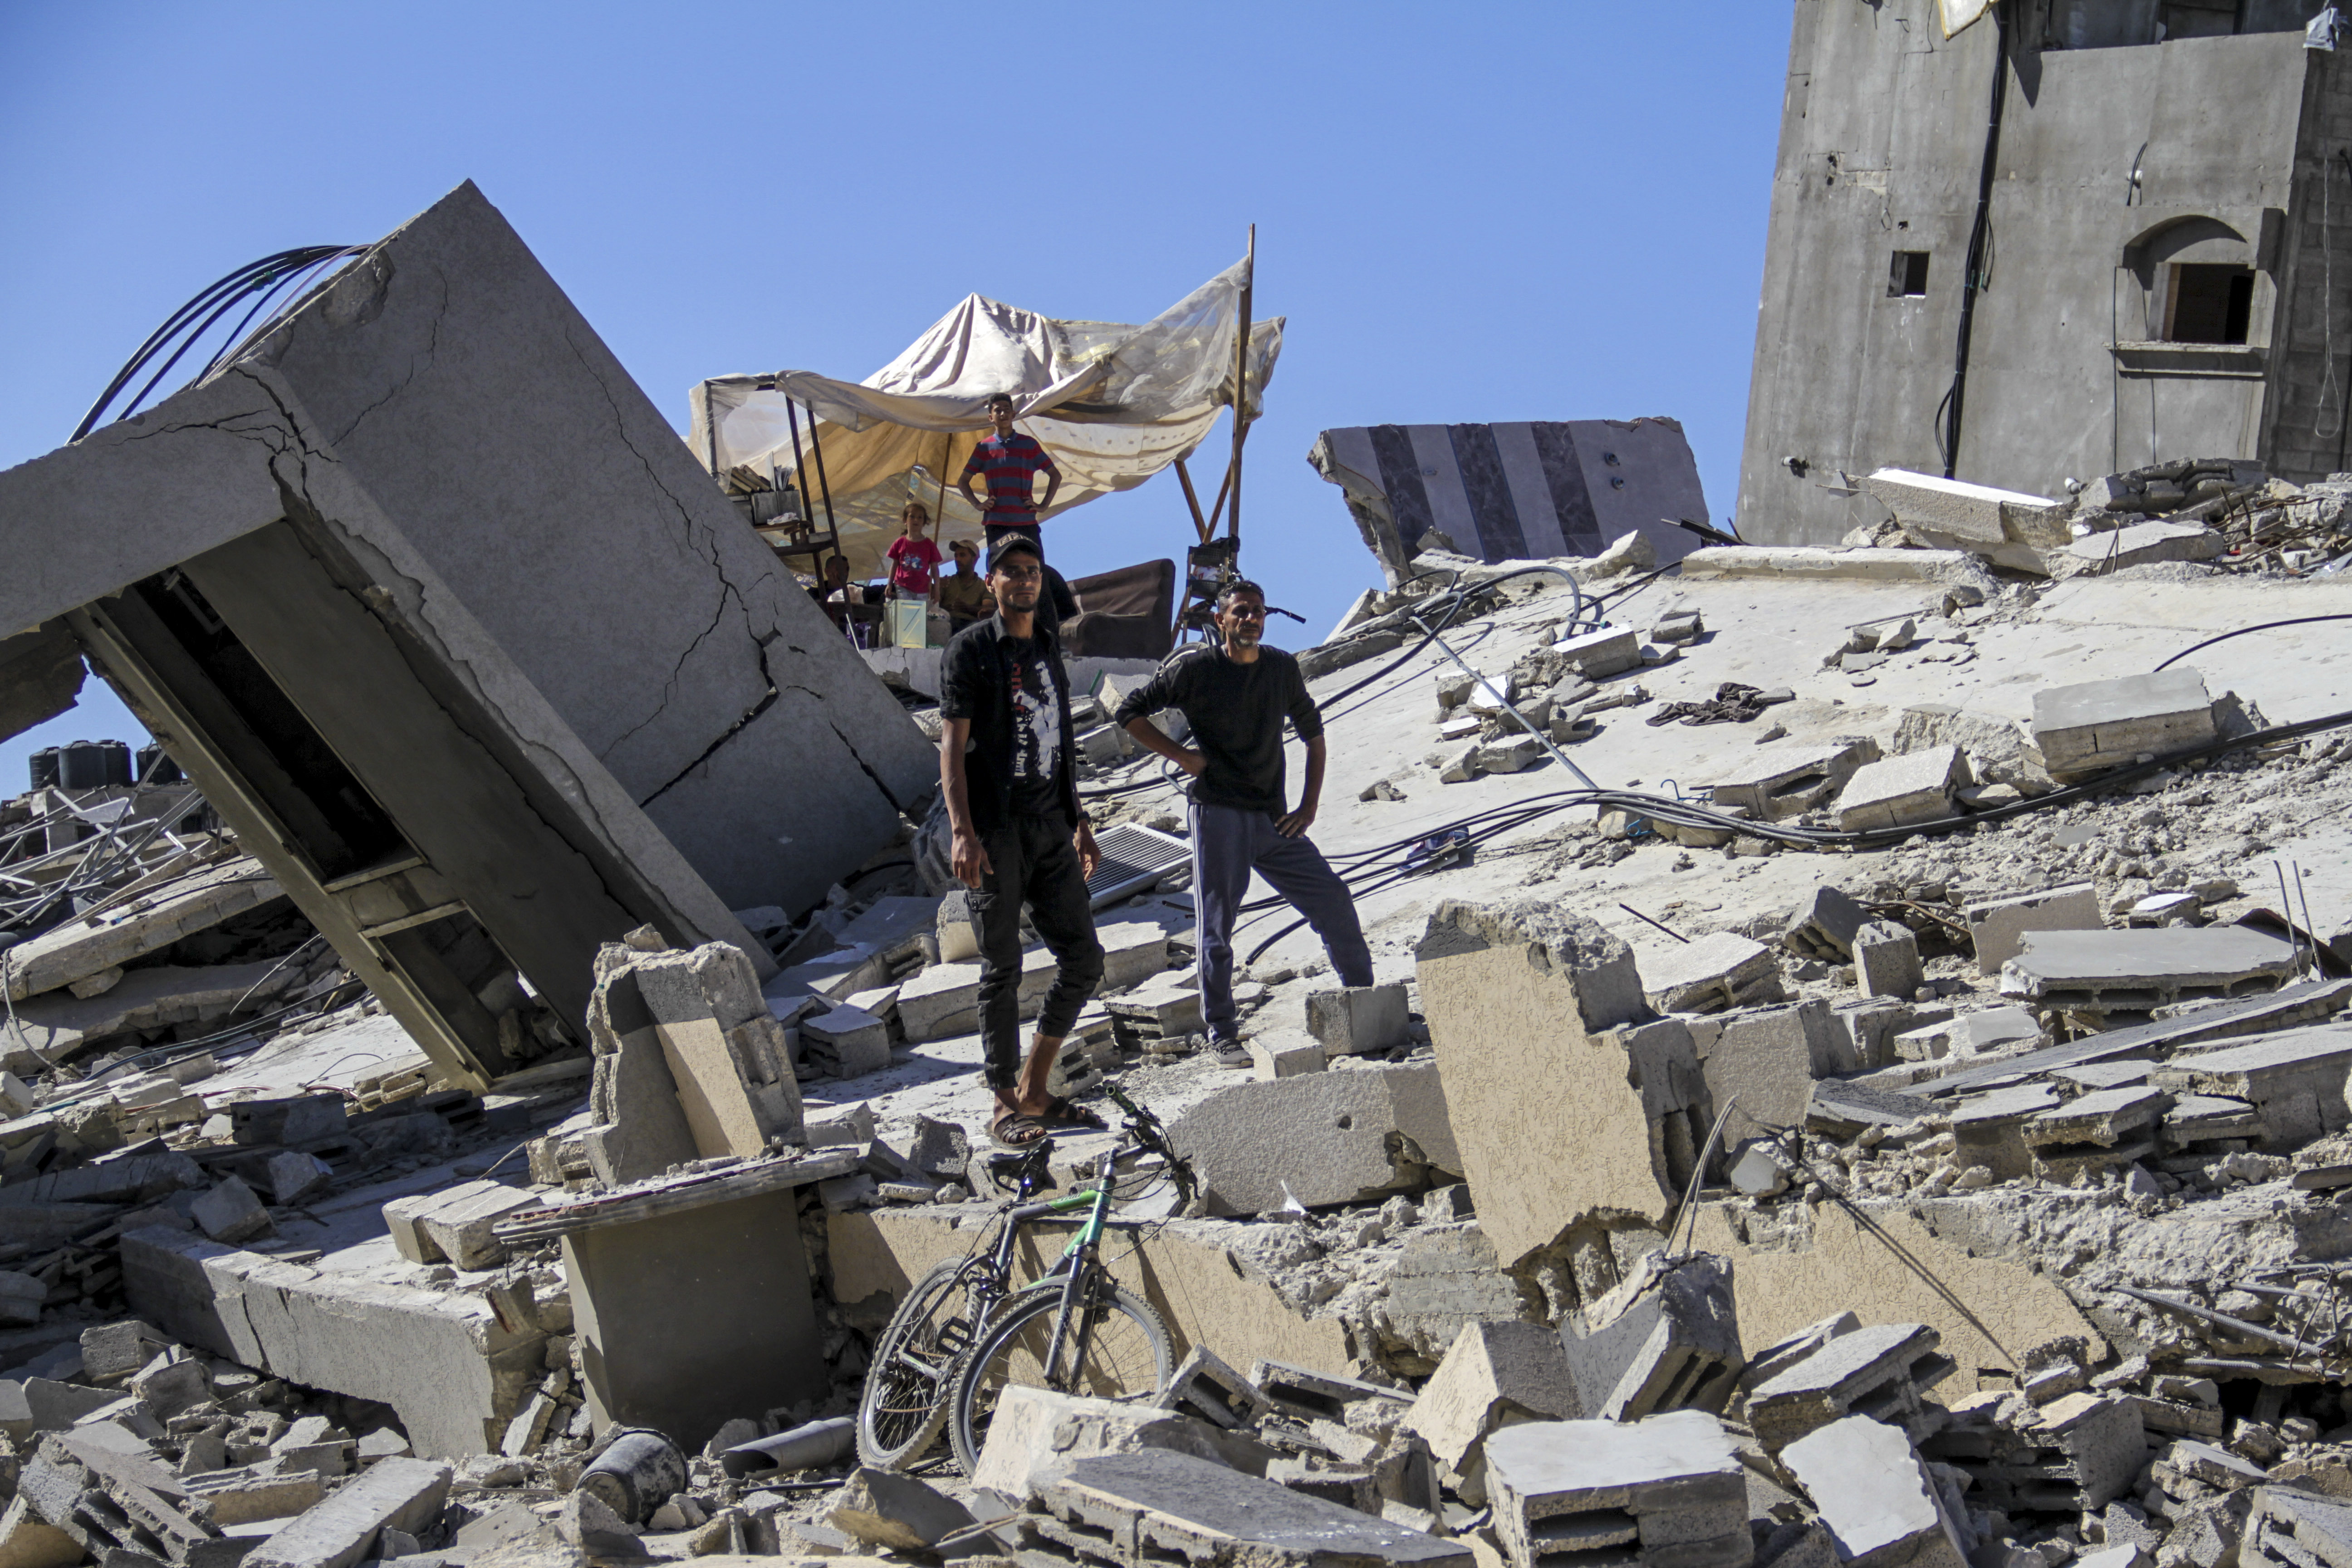 Debris left behind from Al-Shifa Hospital after the Israeli forces withdrawal